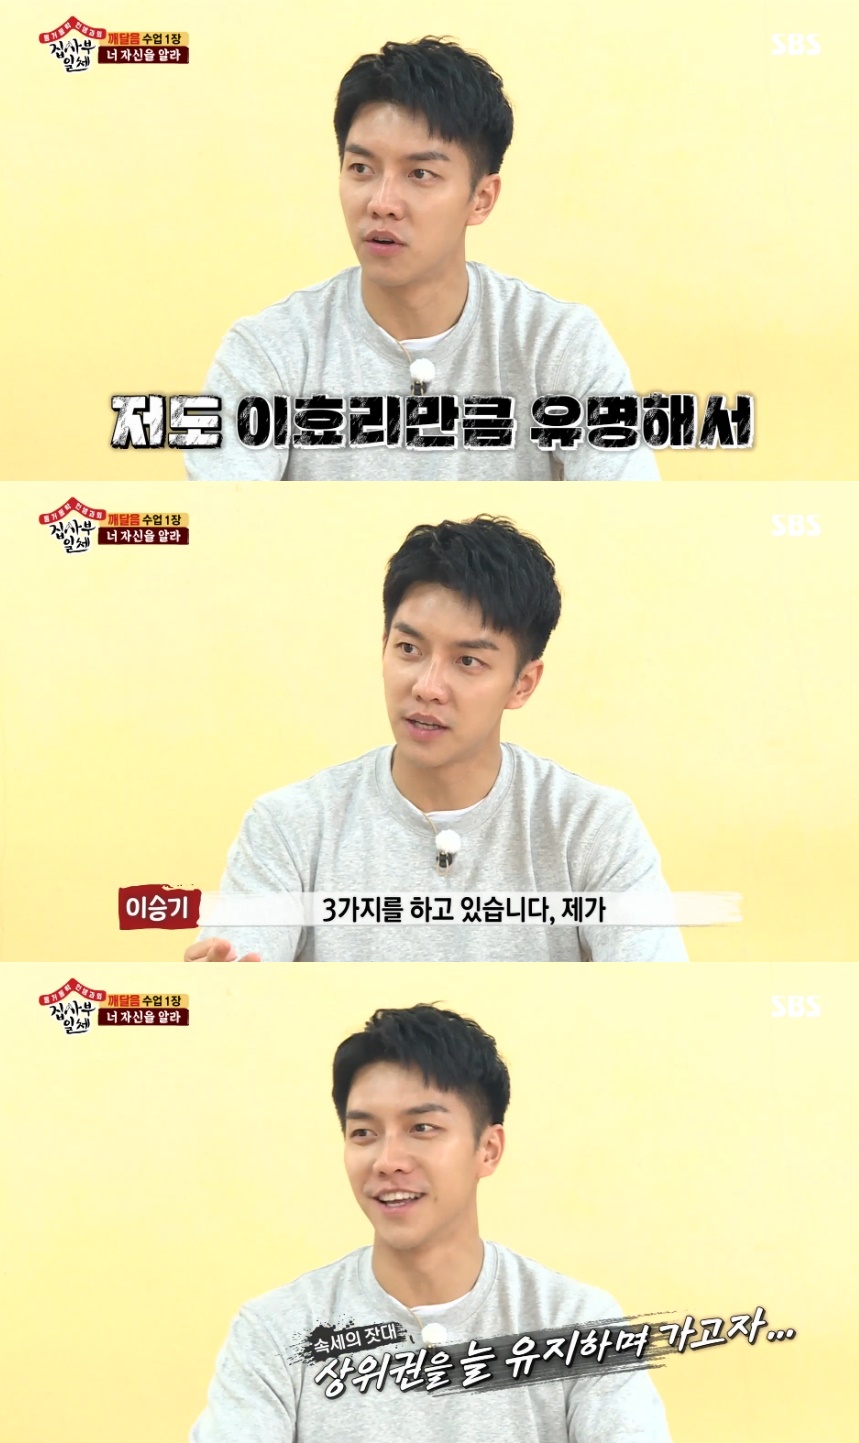 The self-styled sickening singer and actor Lee Seung-gi has confessed to the inside hidden in front of the Buddhist monk.Lee Seung-gi went to the 9th master with actor Lee Sang-yoon, singer Yang Sung-jae, and comedian Yang Se-hyung on SBS Good Sunday - All The Butlers broadcast on May 13th.It was the Buddhist monk that appeared as a new master on the day.Buddhist monk is a monk and social exercise who works in Gyeongju. In 1988, he established a Buddhist community community and conducted performance guidance and social activities.In 2002, he was awarded the Nobel Peace Prize in Asia, which is called the Nobel Peace Prize.The reason for the public to be widely known was the Instant Messenger lecture that was held in 45 cities for 45 days from the 2000s.Instant messenger is to listen to peoples troubles and help them find their own answers through dialogue.The lecture video received a lot of attention by exceeding 100 million views on YouTube, the largest video site.Buddhist Monk is considered a mentor to many stars such as actor Han Ji-min, Shin Min-ah, Jo In-sung and Noh Hee-kyung.In particular, Han Ji-min appeared on the broadcast by telephone connection, and gave a hint to the members of All The Butlers about the Buddhist monk and expressed his respect for him.The Buddhist monk, who met in person, showed a straight character as a person who was respected by many people, and impressed the members with a clear teaching.At the first meeting, he immediately said, What teaching is the teachings. Bring a shovel and start farming. Lee Seung-gi embarrassed the members. Yes? Right?, and the law monk replied, You have to work to eat.Lee Seung-gi asked, Why are you farming? And Buddhist Monk said, You should produce your own food.He also stung Lee Seung-gis fault; Buddhist Monk explained that the highs are relished and that he feels as distressed as he is excited by the popularity.Lee Seung-gi quipped numbly, Im not as excited as I thought.If you do this, its okay to play, but you dont get a party as a worker, Buddhist Monk later pointed out to Lee Seung-gis clumsy hands.Lee Seung-gi asked, Is it okay to be here as a date course? And Buddhist Monk said, Suddenly, what date course?I told you about the entertainment when I was an entertainer, he said. I thought it was an entertainment that I played, but it sounded like a man and woman in my ears. Lee Sang-yoon said, Do you normally listen to what you want to hear?I think Im in love now, from morning, and Lee Seung-gi said, Im not out of the world yet. Im a kid who is in the world.Let me get out of it once, really, empty my mind, he said.There was also a story about love and marriage, which are common troubles of people.Lee Seung-gi asked, What kind of woman should we meet? And Buddhist Monk said, Marriage and love is different.Because they are in love and confused marriage, they have problems. Love is separated and meet when they are good, and marriage is living together in a house.You have to think marriage is The Roommate, she said.We see the person first when we marriage. The second time we see ability. What school is there, where is the company, what parents do.But few people ask me that it is difficult because of marriage life and ask me that there is a problem with my husband or wifes face.Most of them are like differences in lifestyle and personality, he added. When you live with The Roommate, the other person is not so important. Lee Seung-gi, who has gained another enlightenment, said, Hey... Ill have to fix the standard by cutting it all out.Lee Seung-gis troubles counseling was not the end here.Lee Seung-gi asked Buddhist monk, I did not recognize Lee Hyoris sister before, and Buddhist monk replied, I did not recognize it at first.Lee Seung-gi, after raving Im as famous as Lee Hyori, said Im doing three things: I made my debut as a singer; the lyrics of the song are quite upbeat.He is also a singer and an actor.And I am doing three kinds of entertainment together. I went to the army hard and did things that others did not do. When I get a chance, I want to show it, I want to boast, and I seem to have a hard time.How do you manage that?Buddhist monk said, Going to the army is not a pride that all South Korean men have gone.I want to say that everyone has done a normal job, but people around me do not do it, so I have been going harder.Others would say, All South Korean men have been there, but they have gone alone. I went to the army, but I cant say.If you ask where you have been, you can say that you have been to a special war. Lee Seung-gi expressed his reflection that he was suddenly embarrassed.hwang hye-jin